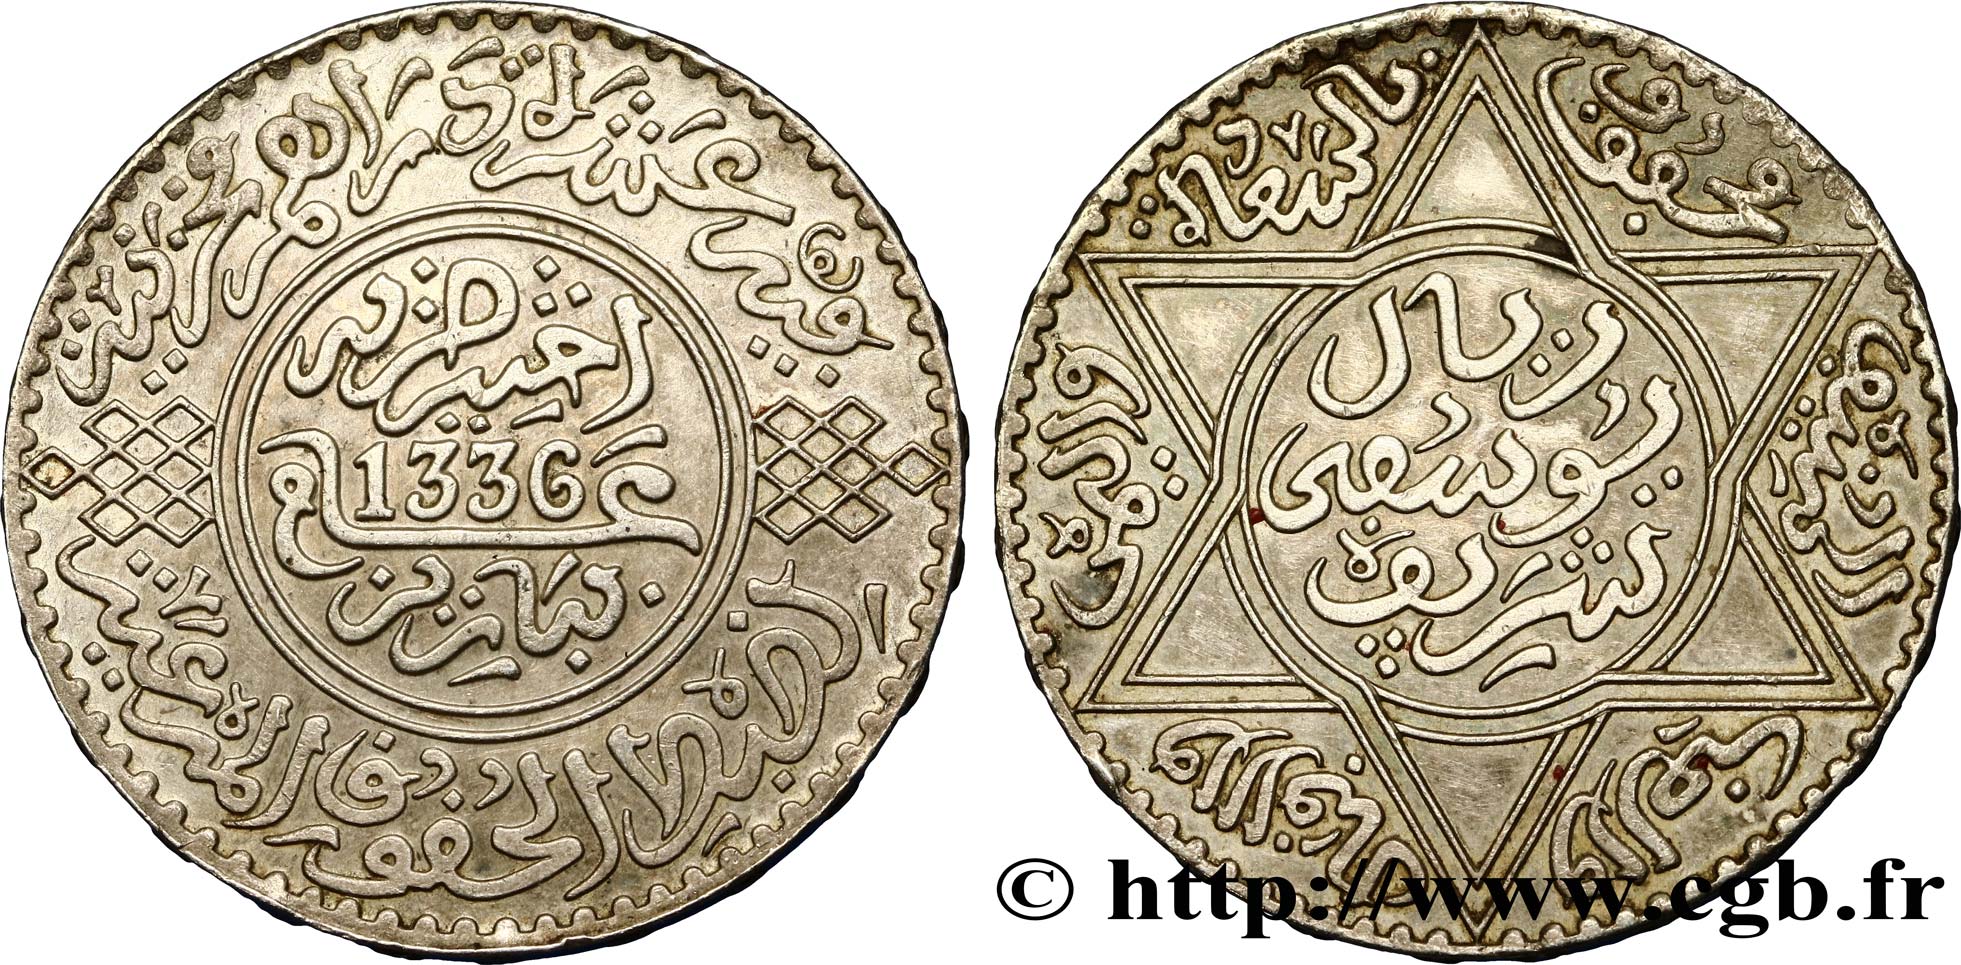 MOROCCO - FRENCH PROTECTORATE 10 Dirhams Moulay Youssef I an 1336 1917 Paris AU 